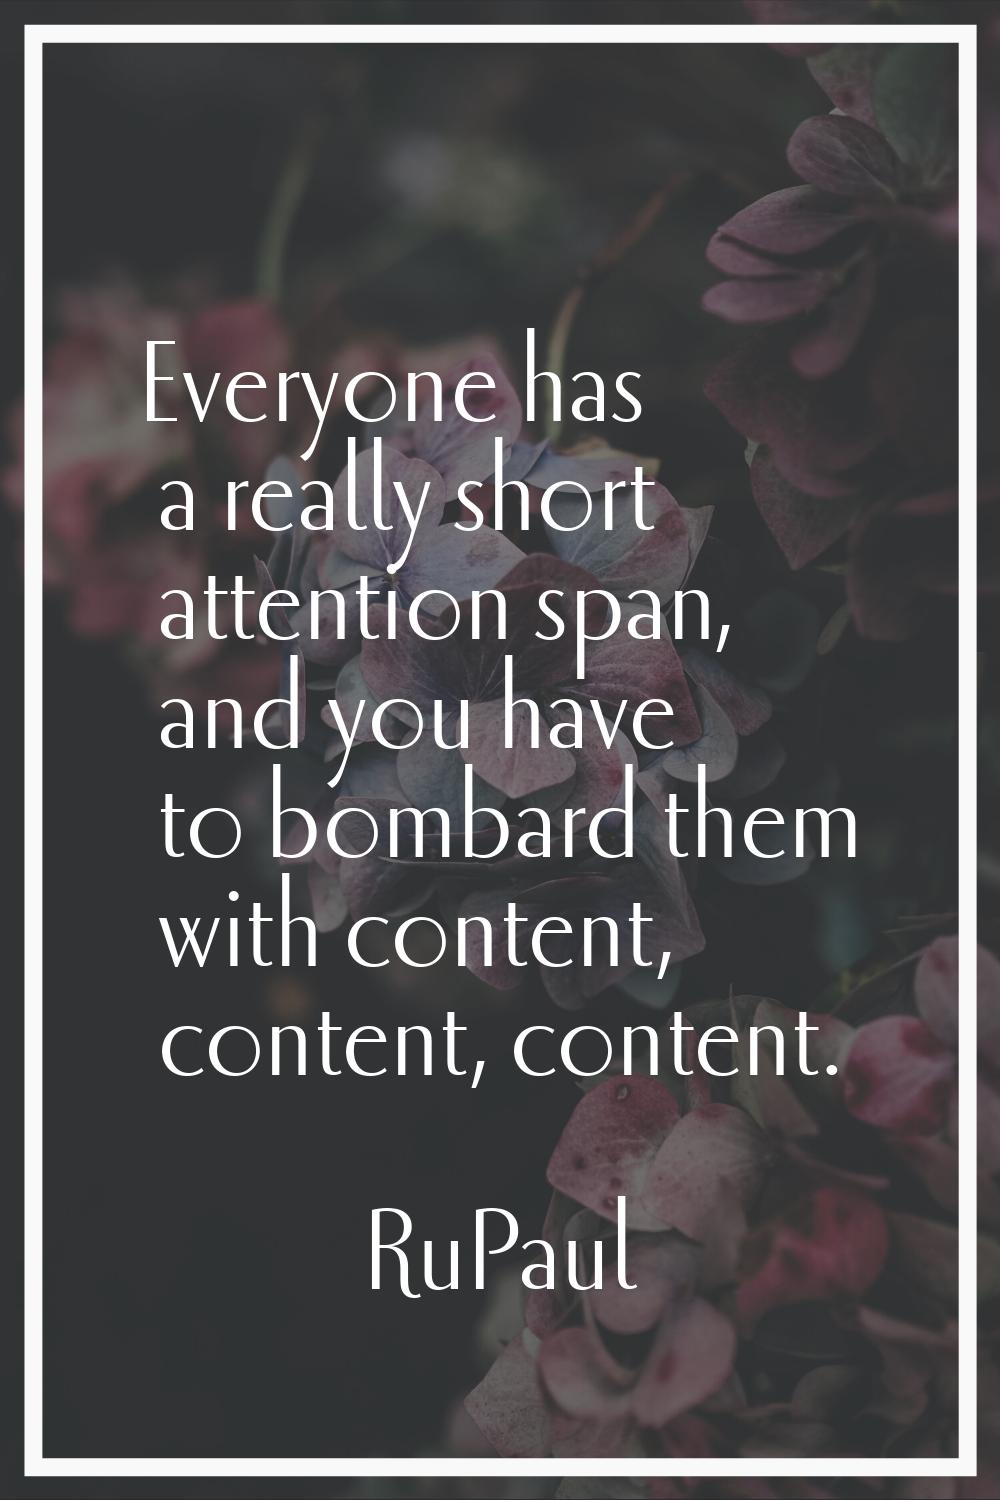 Everyone has a really short attention span, and you have to bombard them with content, content, con